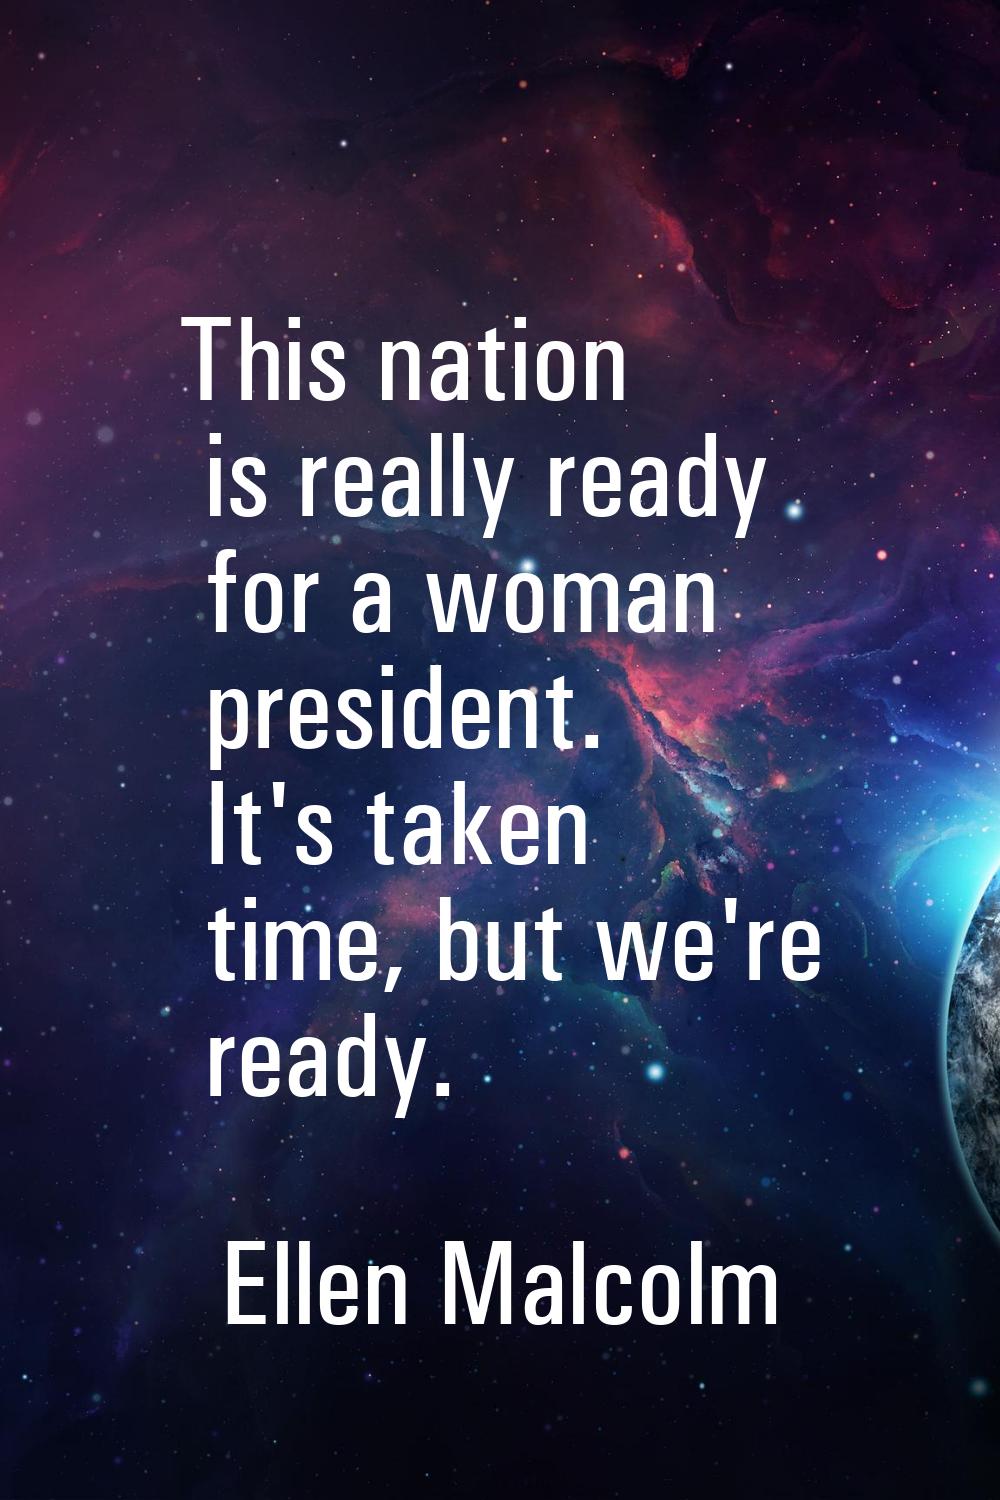 This nation is really ready for a woman president. It's taken time, but we're ready.